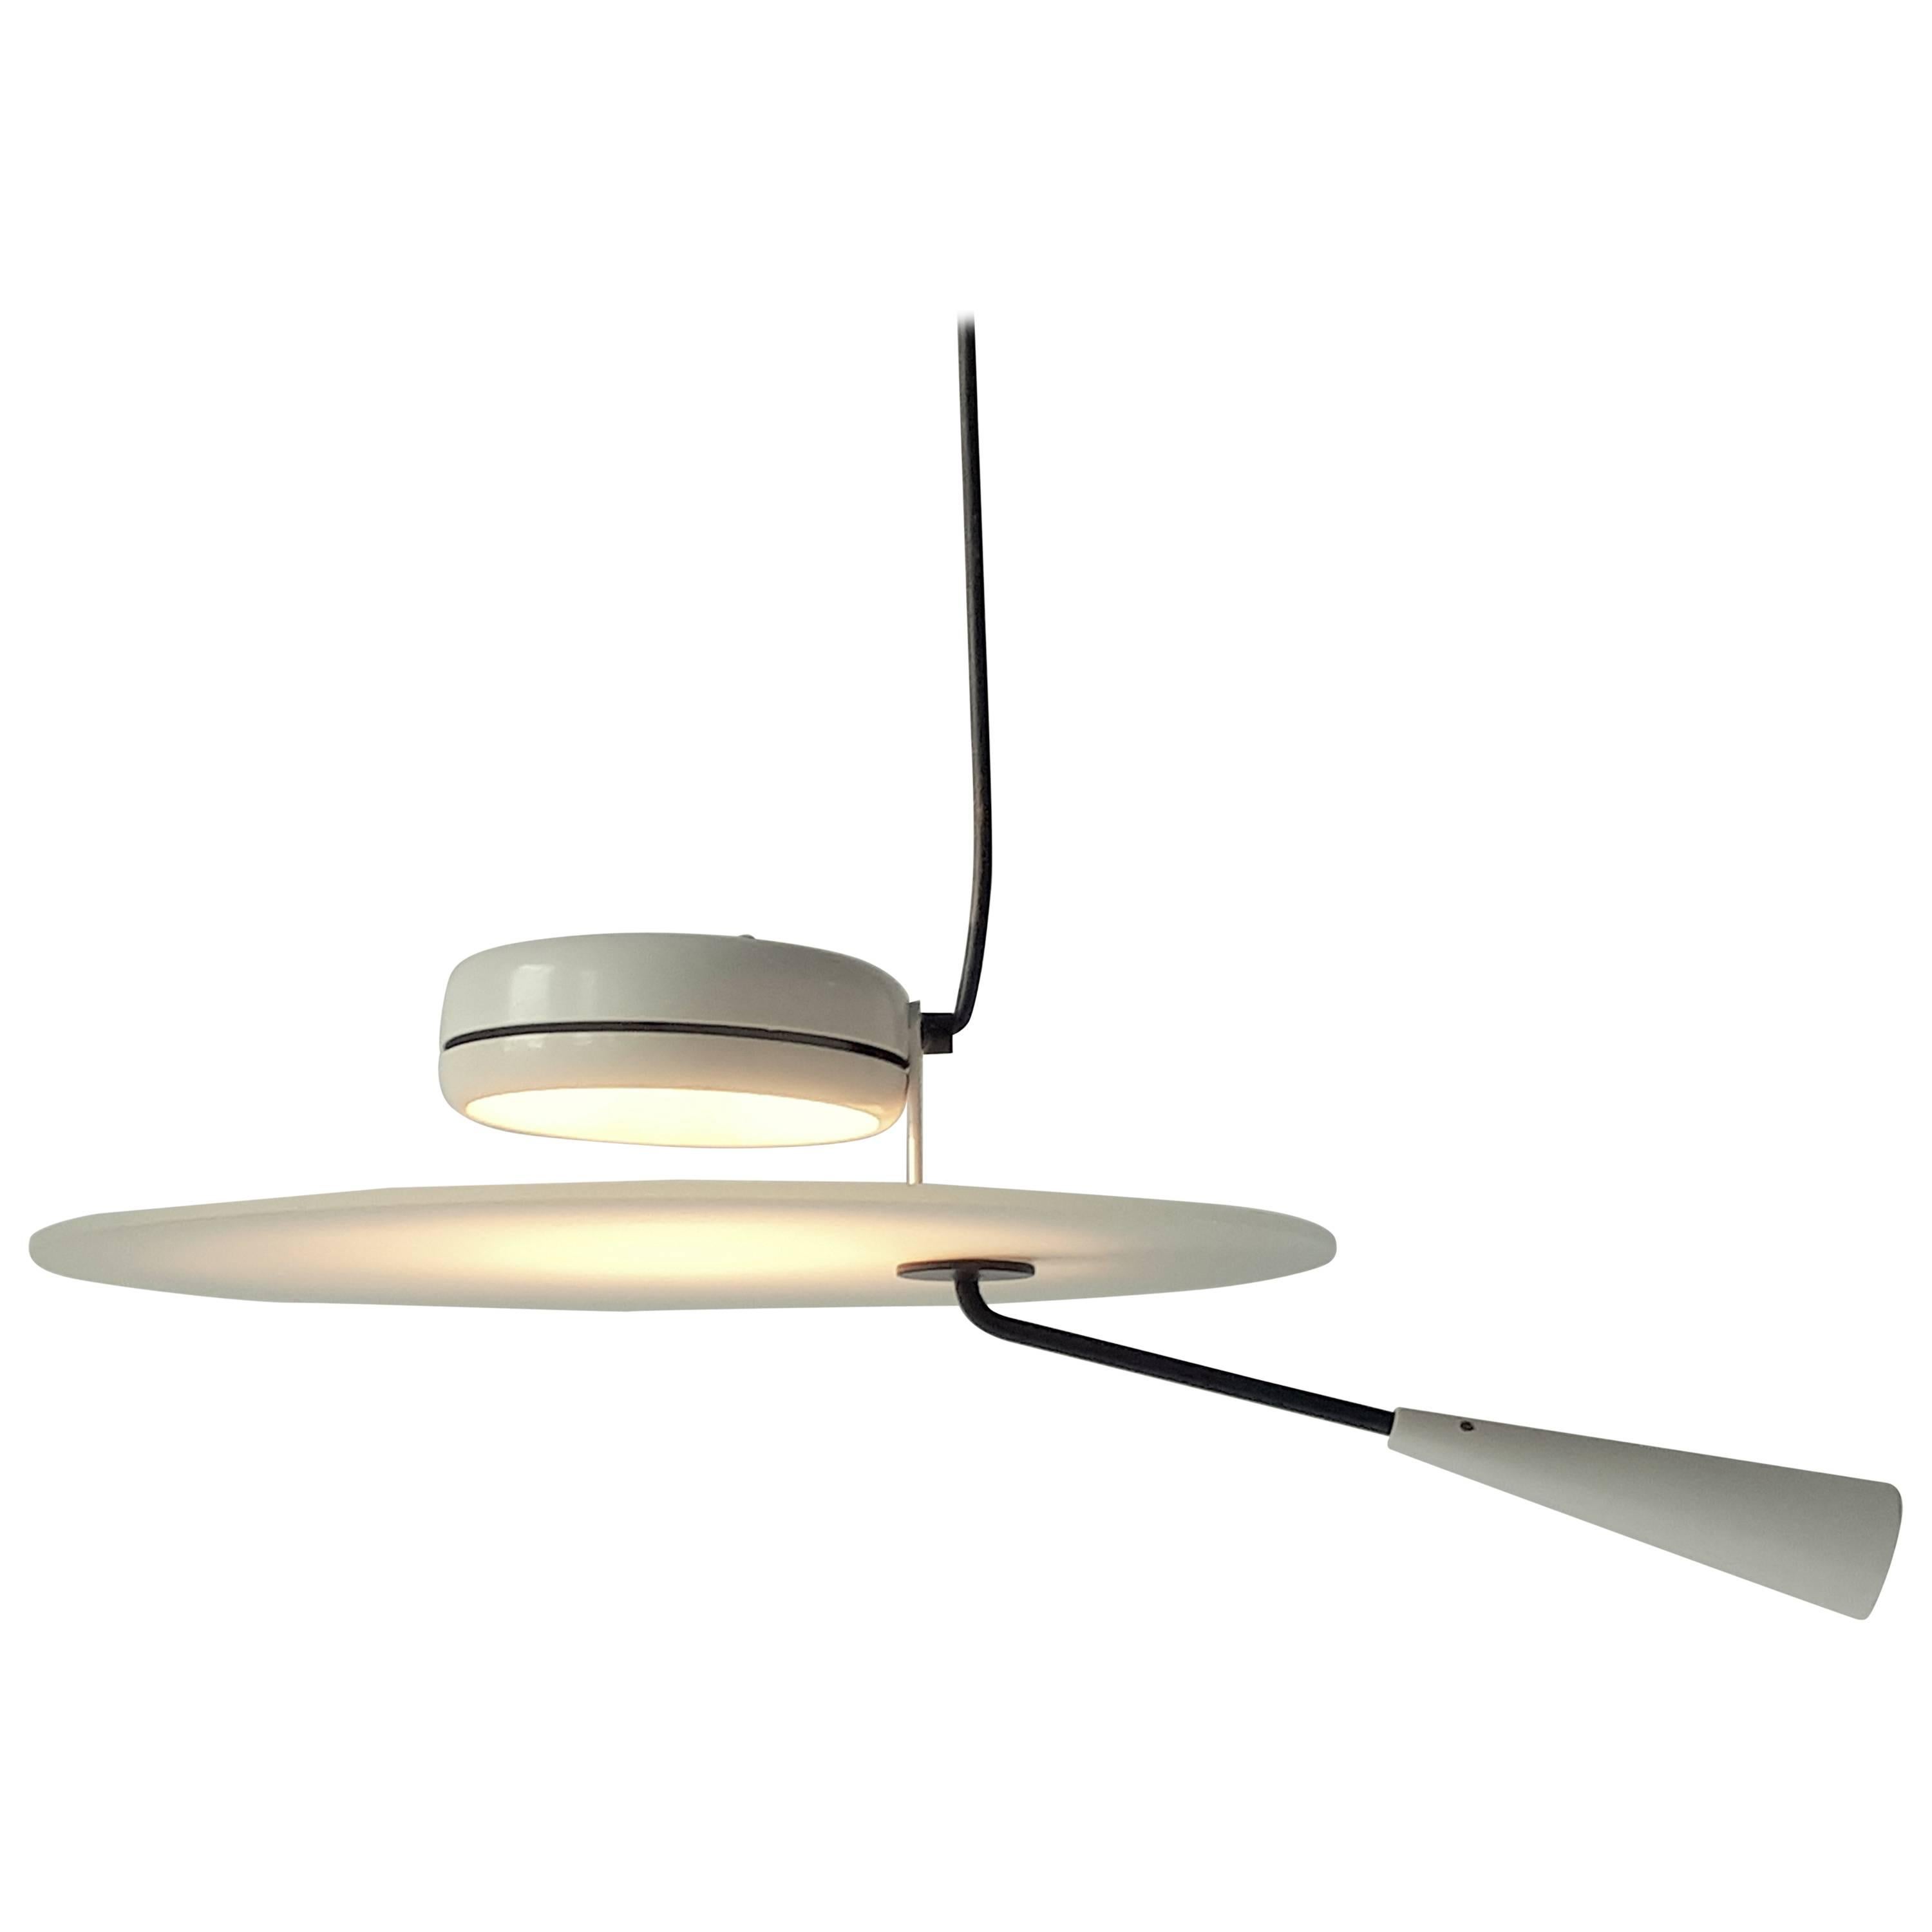 Small agile chandelier that pivot at any angle and in all direction (including perfectly horizontal) just by moving the counterweight from left to right. 

Beside lighting a dinning table or counter top , it may also acurately light up an art work